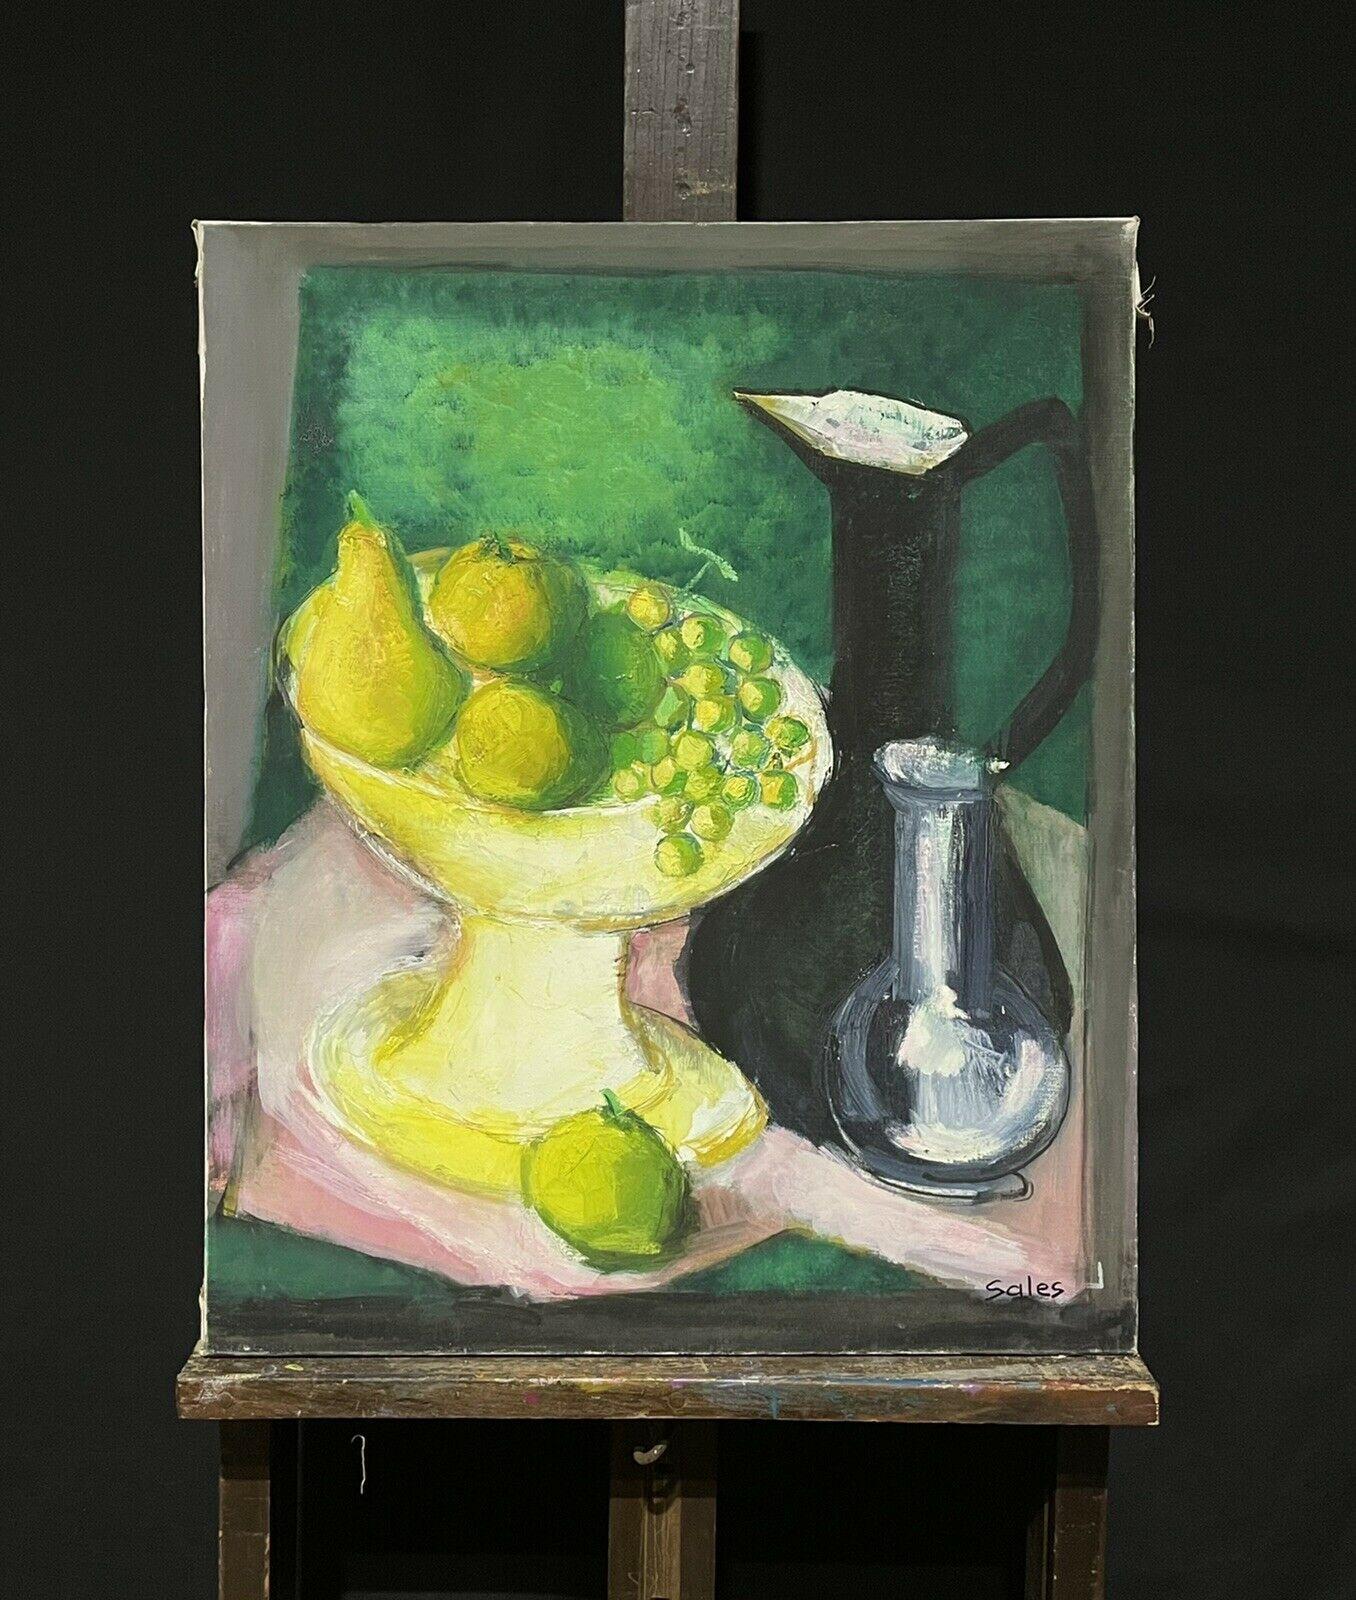 Large 1970's French Modernist Signed Oil Beautiful Still Life Fruit & Colors - Painting by Robert Sales